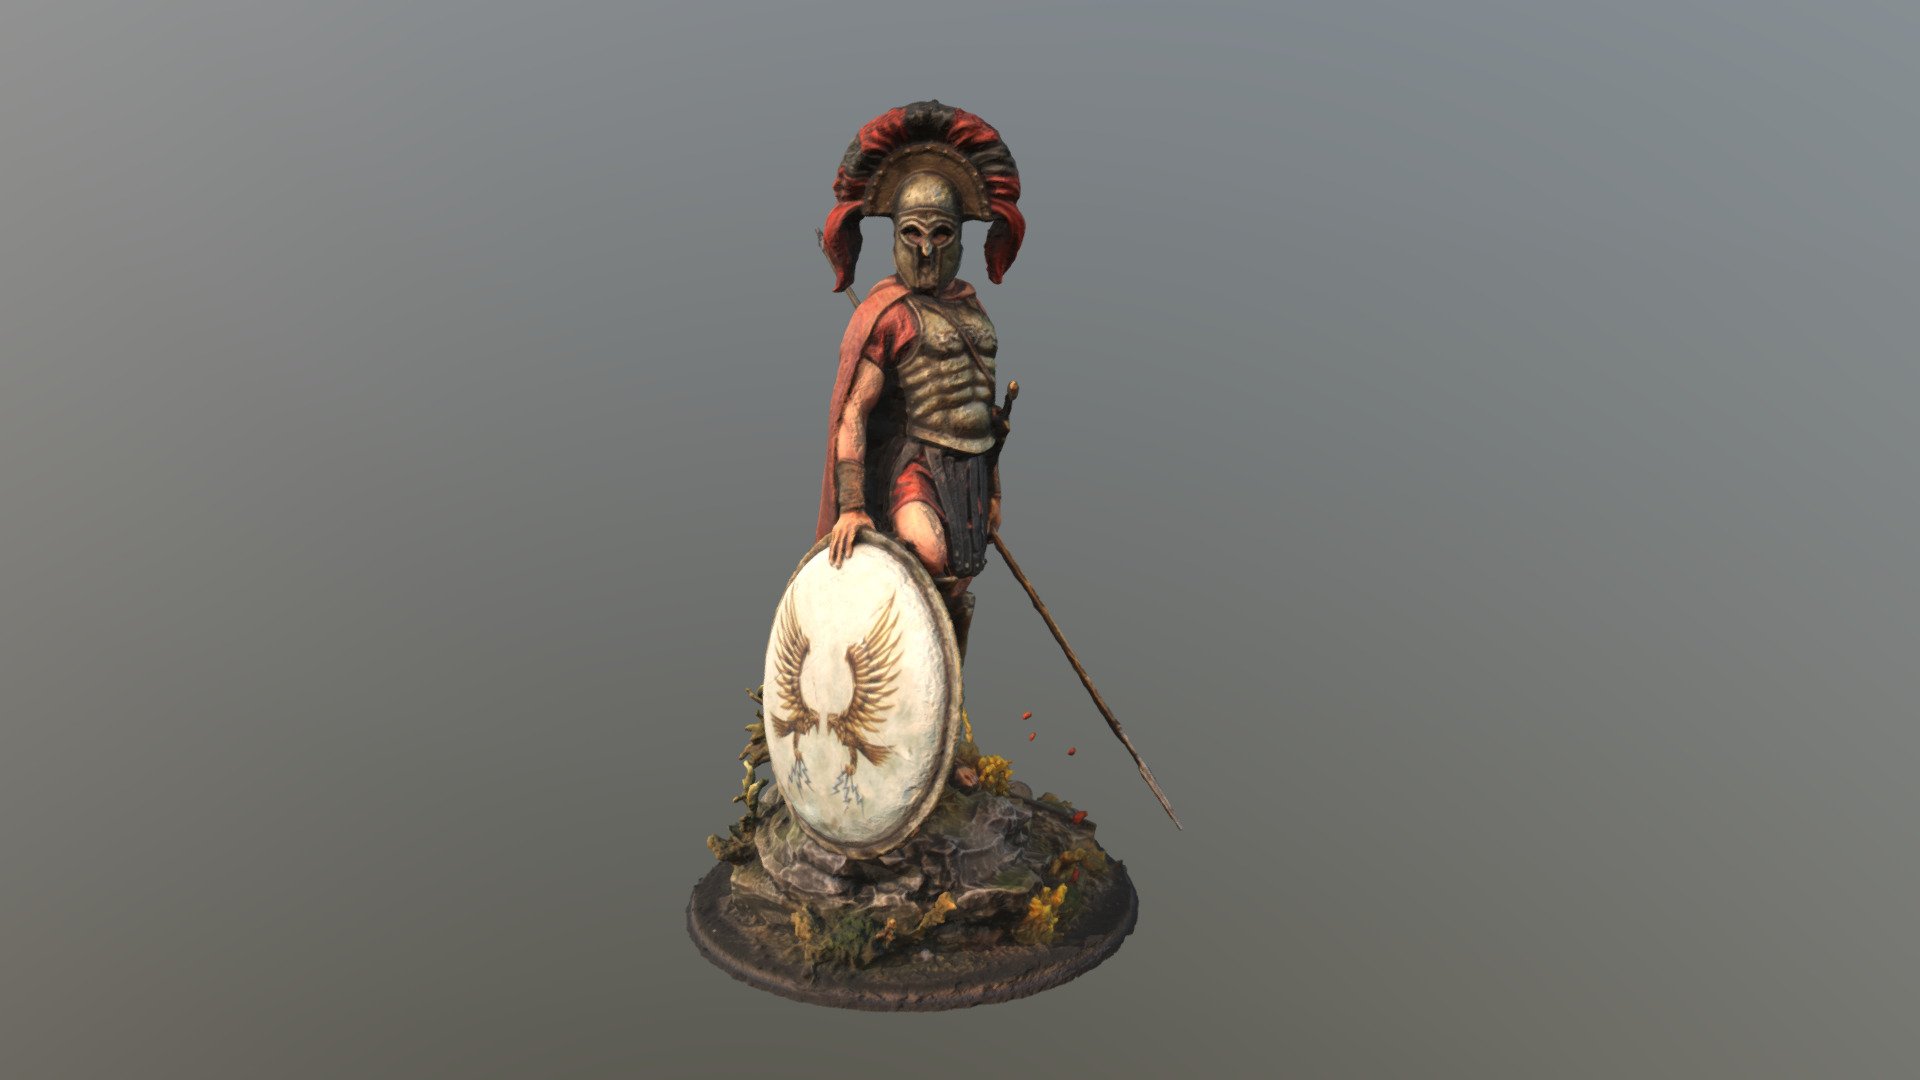 Scan of greek soldier miniature painted by Ticos Minis.

360 photos, EOS 4000D.

Processed in Reality Capture 3d model